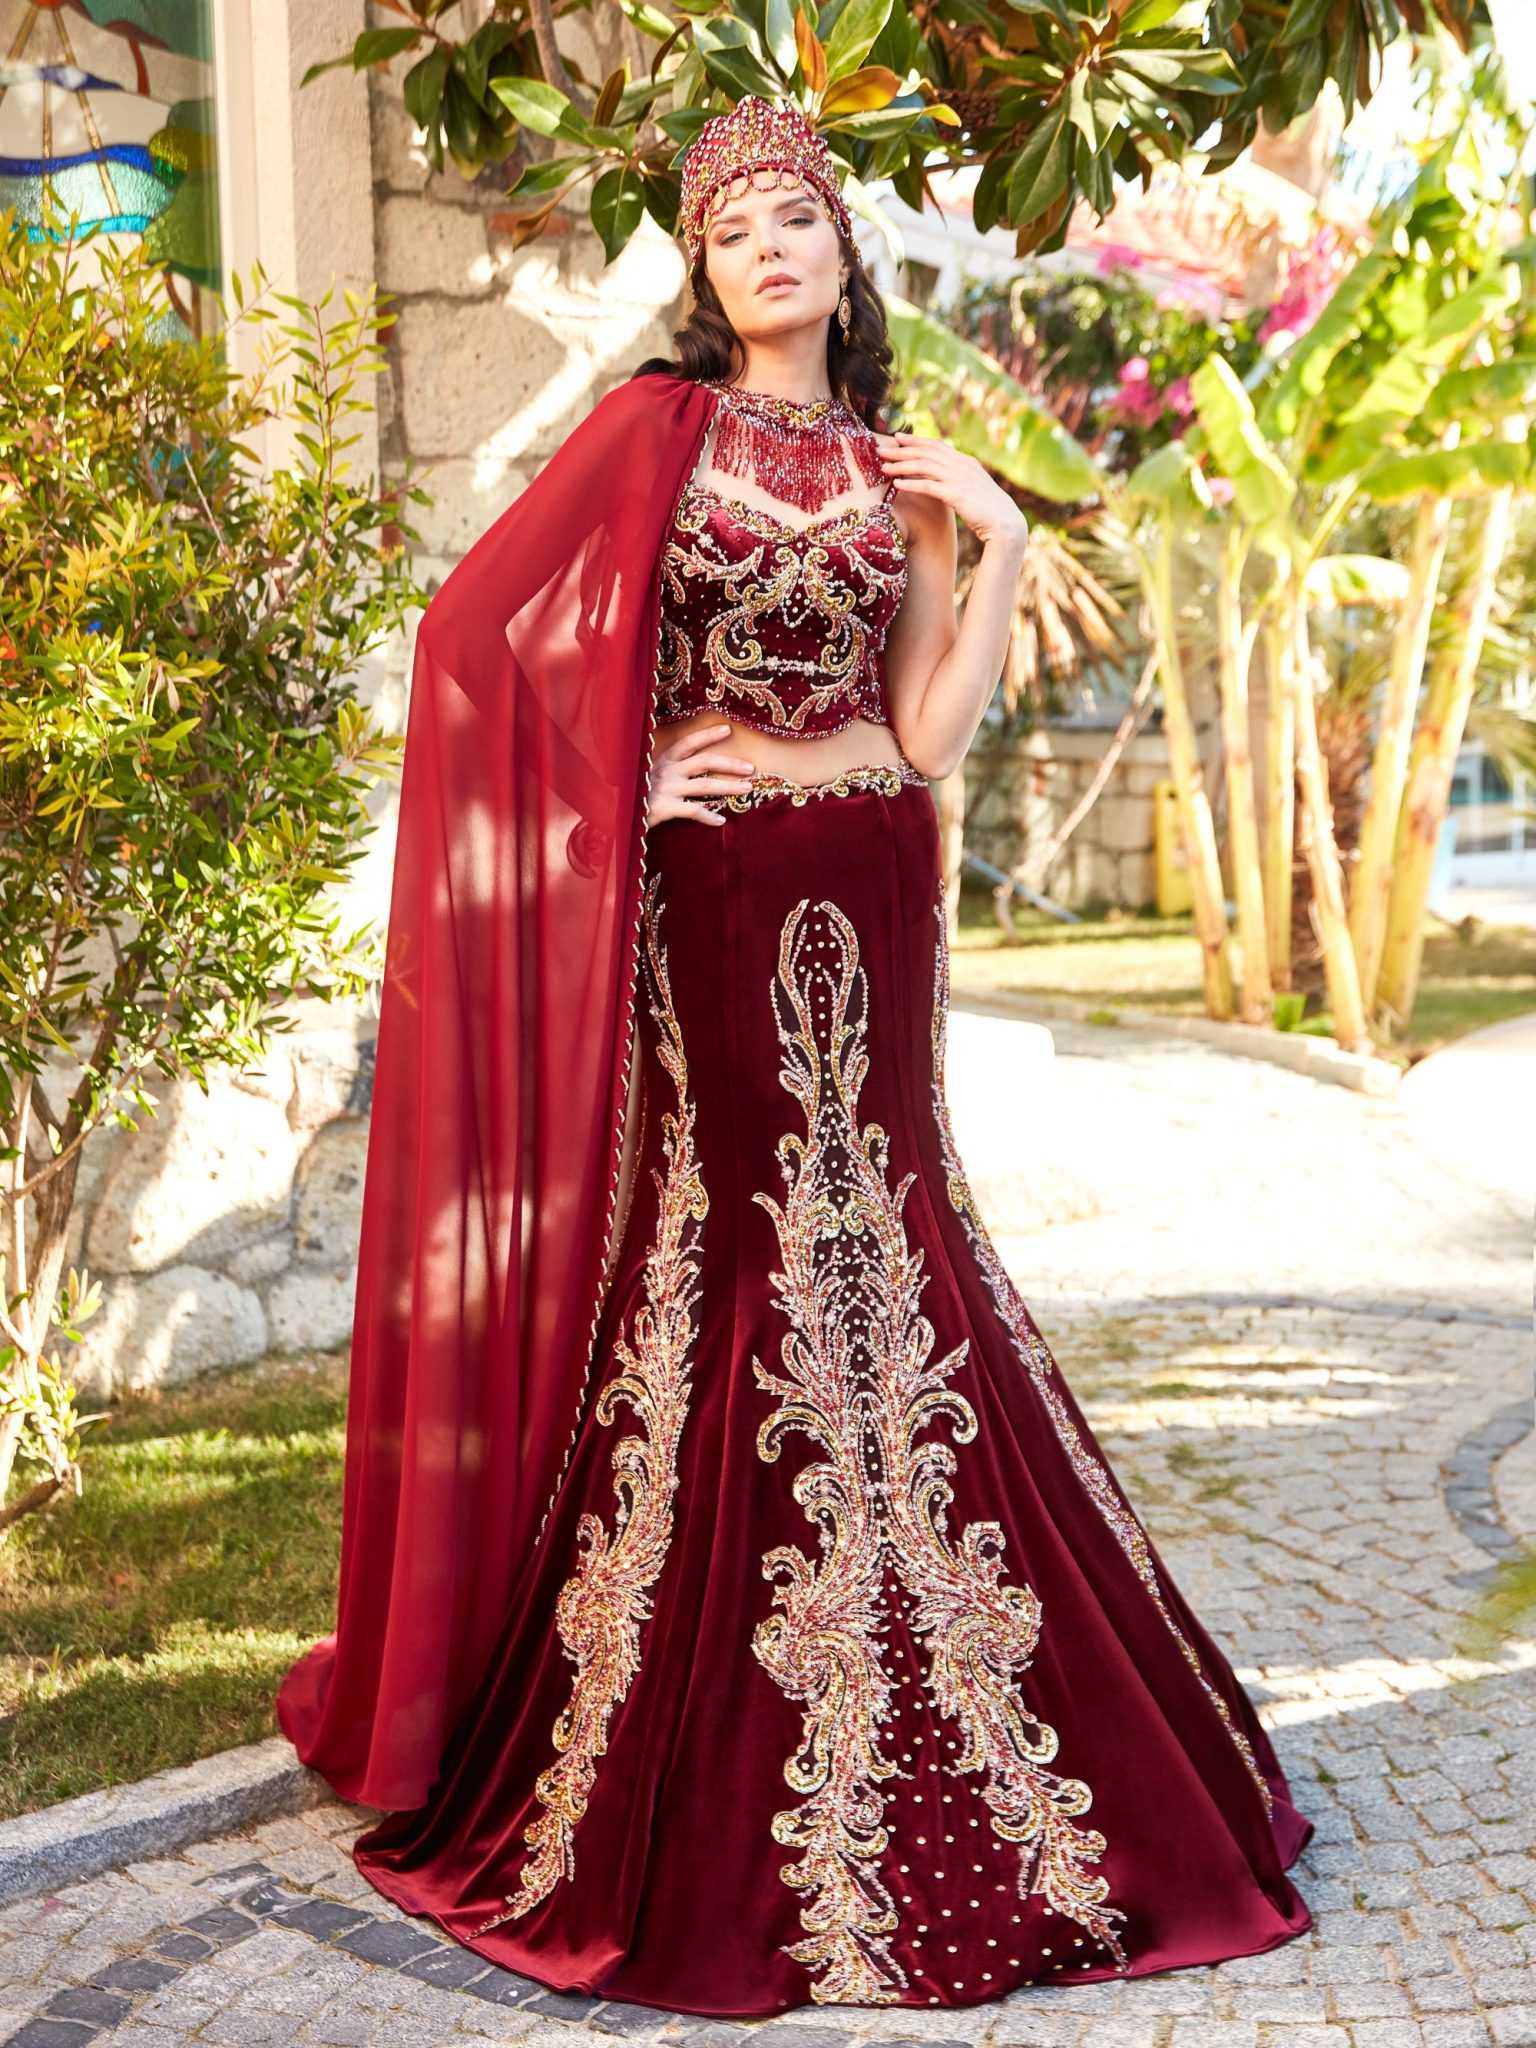 buy Red Mermaid Style Designer Gown dresses online For Prom And Mehndi Party dresses shopping